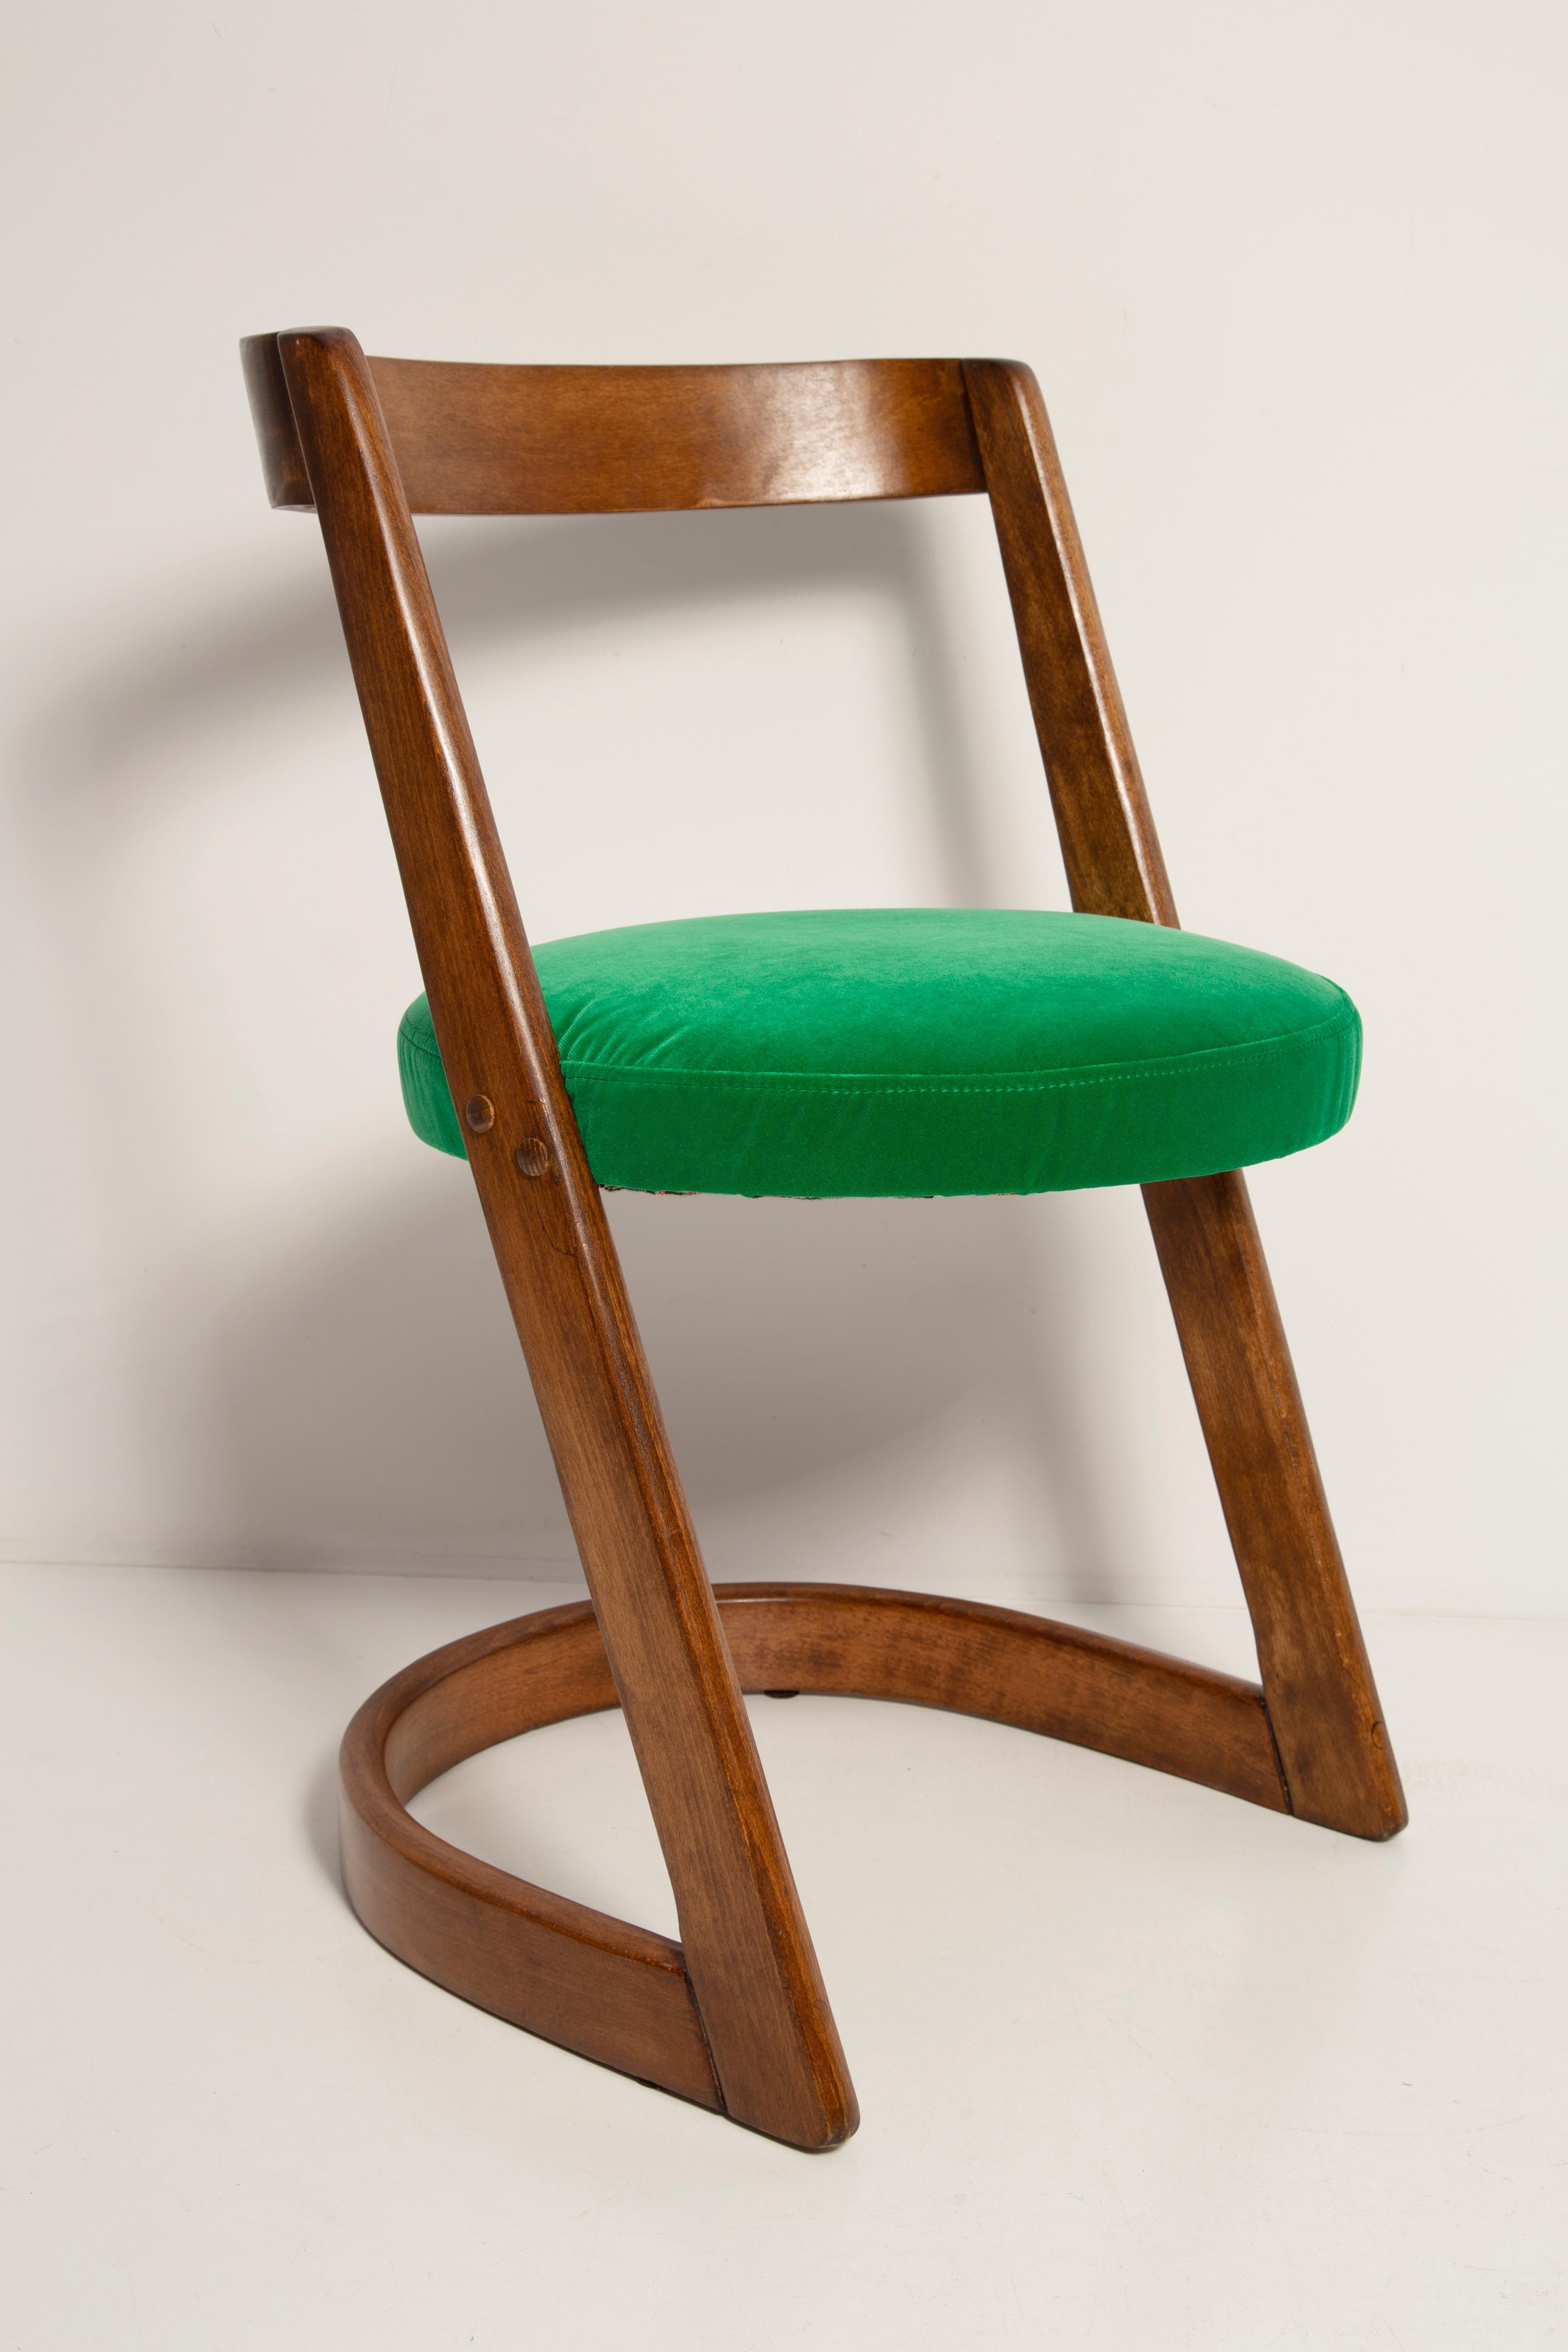 Halfa chair designed by Baumann in the 1970s.
In the catalogue of the avant-garde collection.
Made from 5 pieces of Doubs beech.

Made of beechwood. Chair is after a complete upholstery renovation, the woodwork has been refreshed. Seat is dressed in